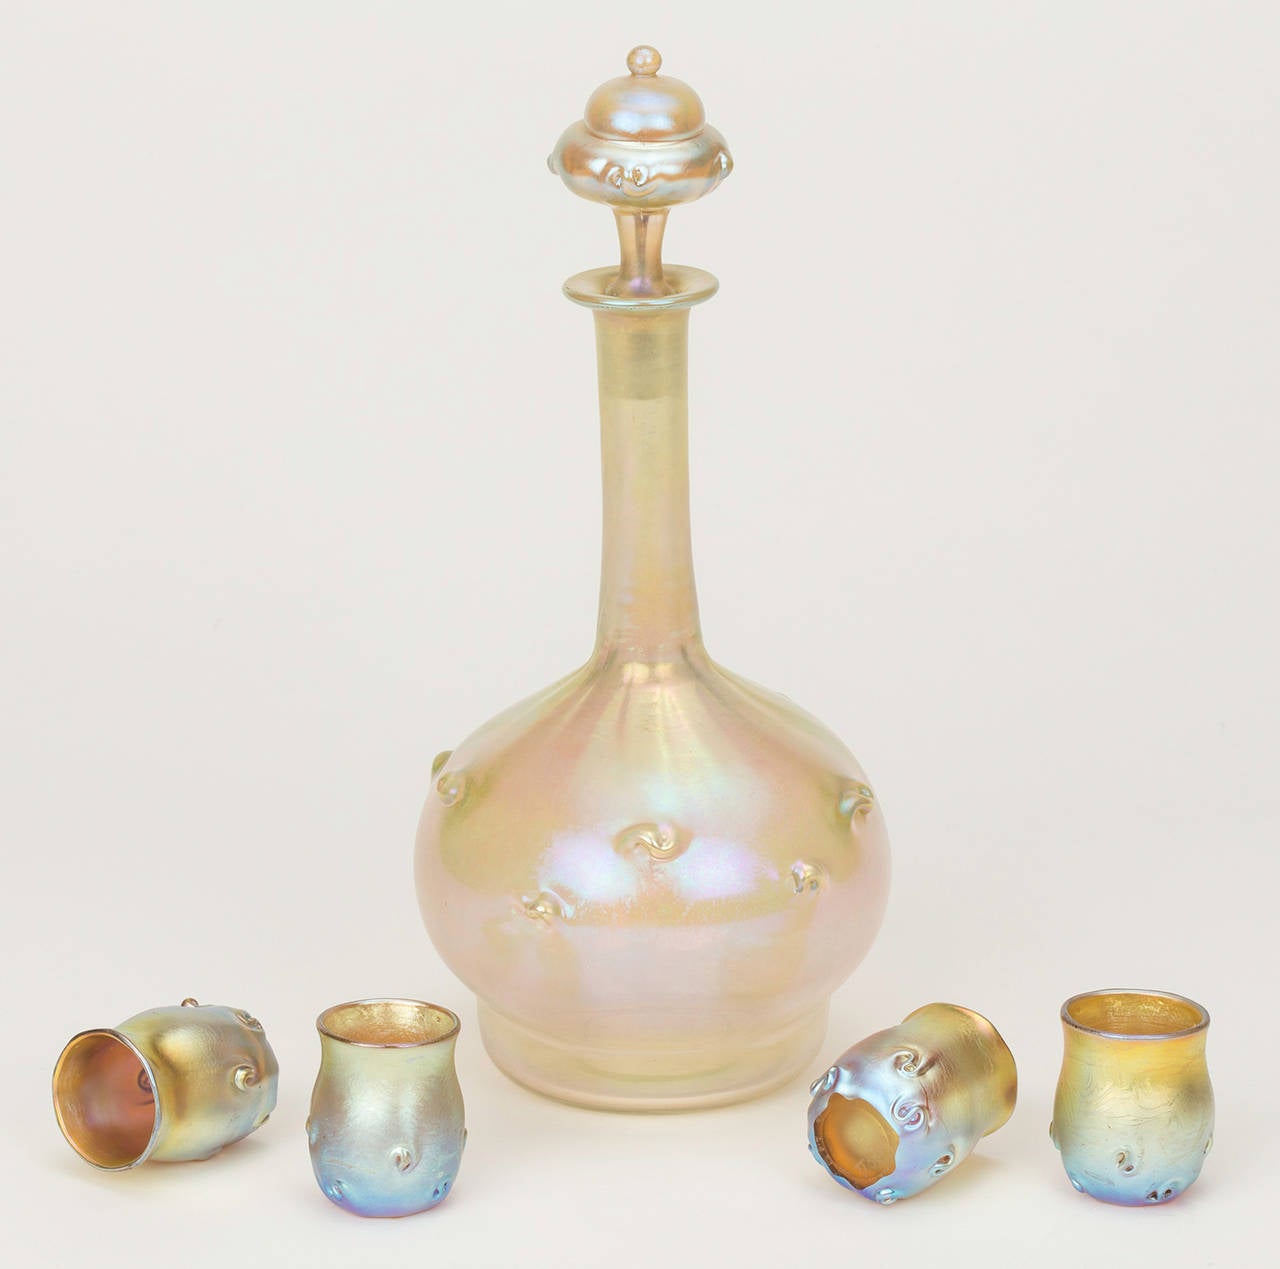 A beautiful Tiffany Studios Favrile Glass Decanter and cordial set. This set comes from an estate in Santa Barbara, California. The original owner purchased in the 1930s. Each piece is numbered. Decanter is initialled and etched LCT U5676. Cordials